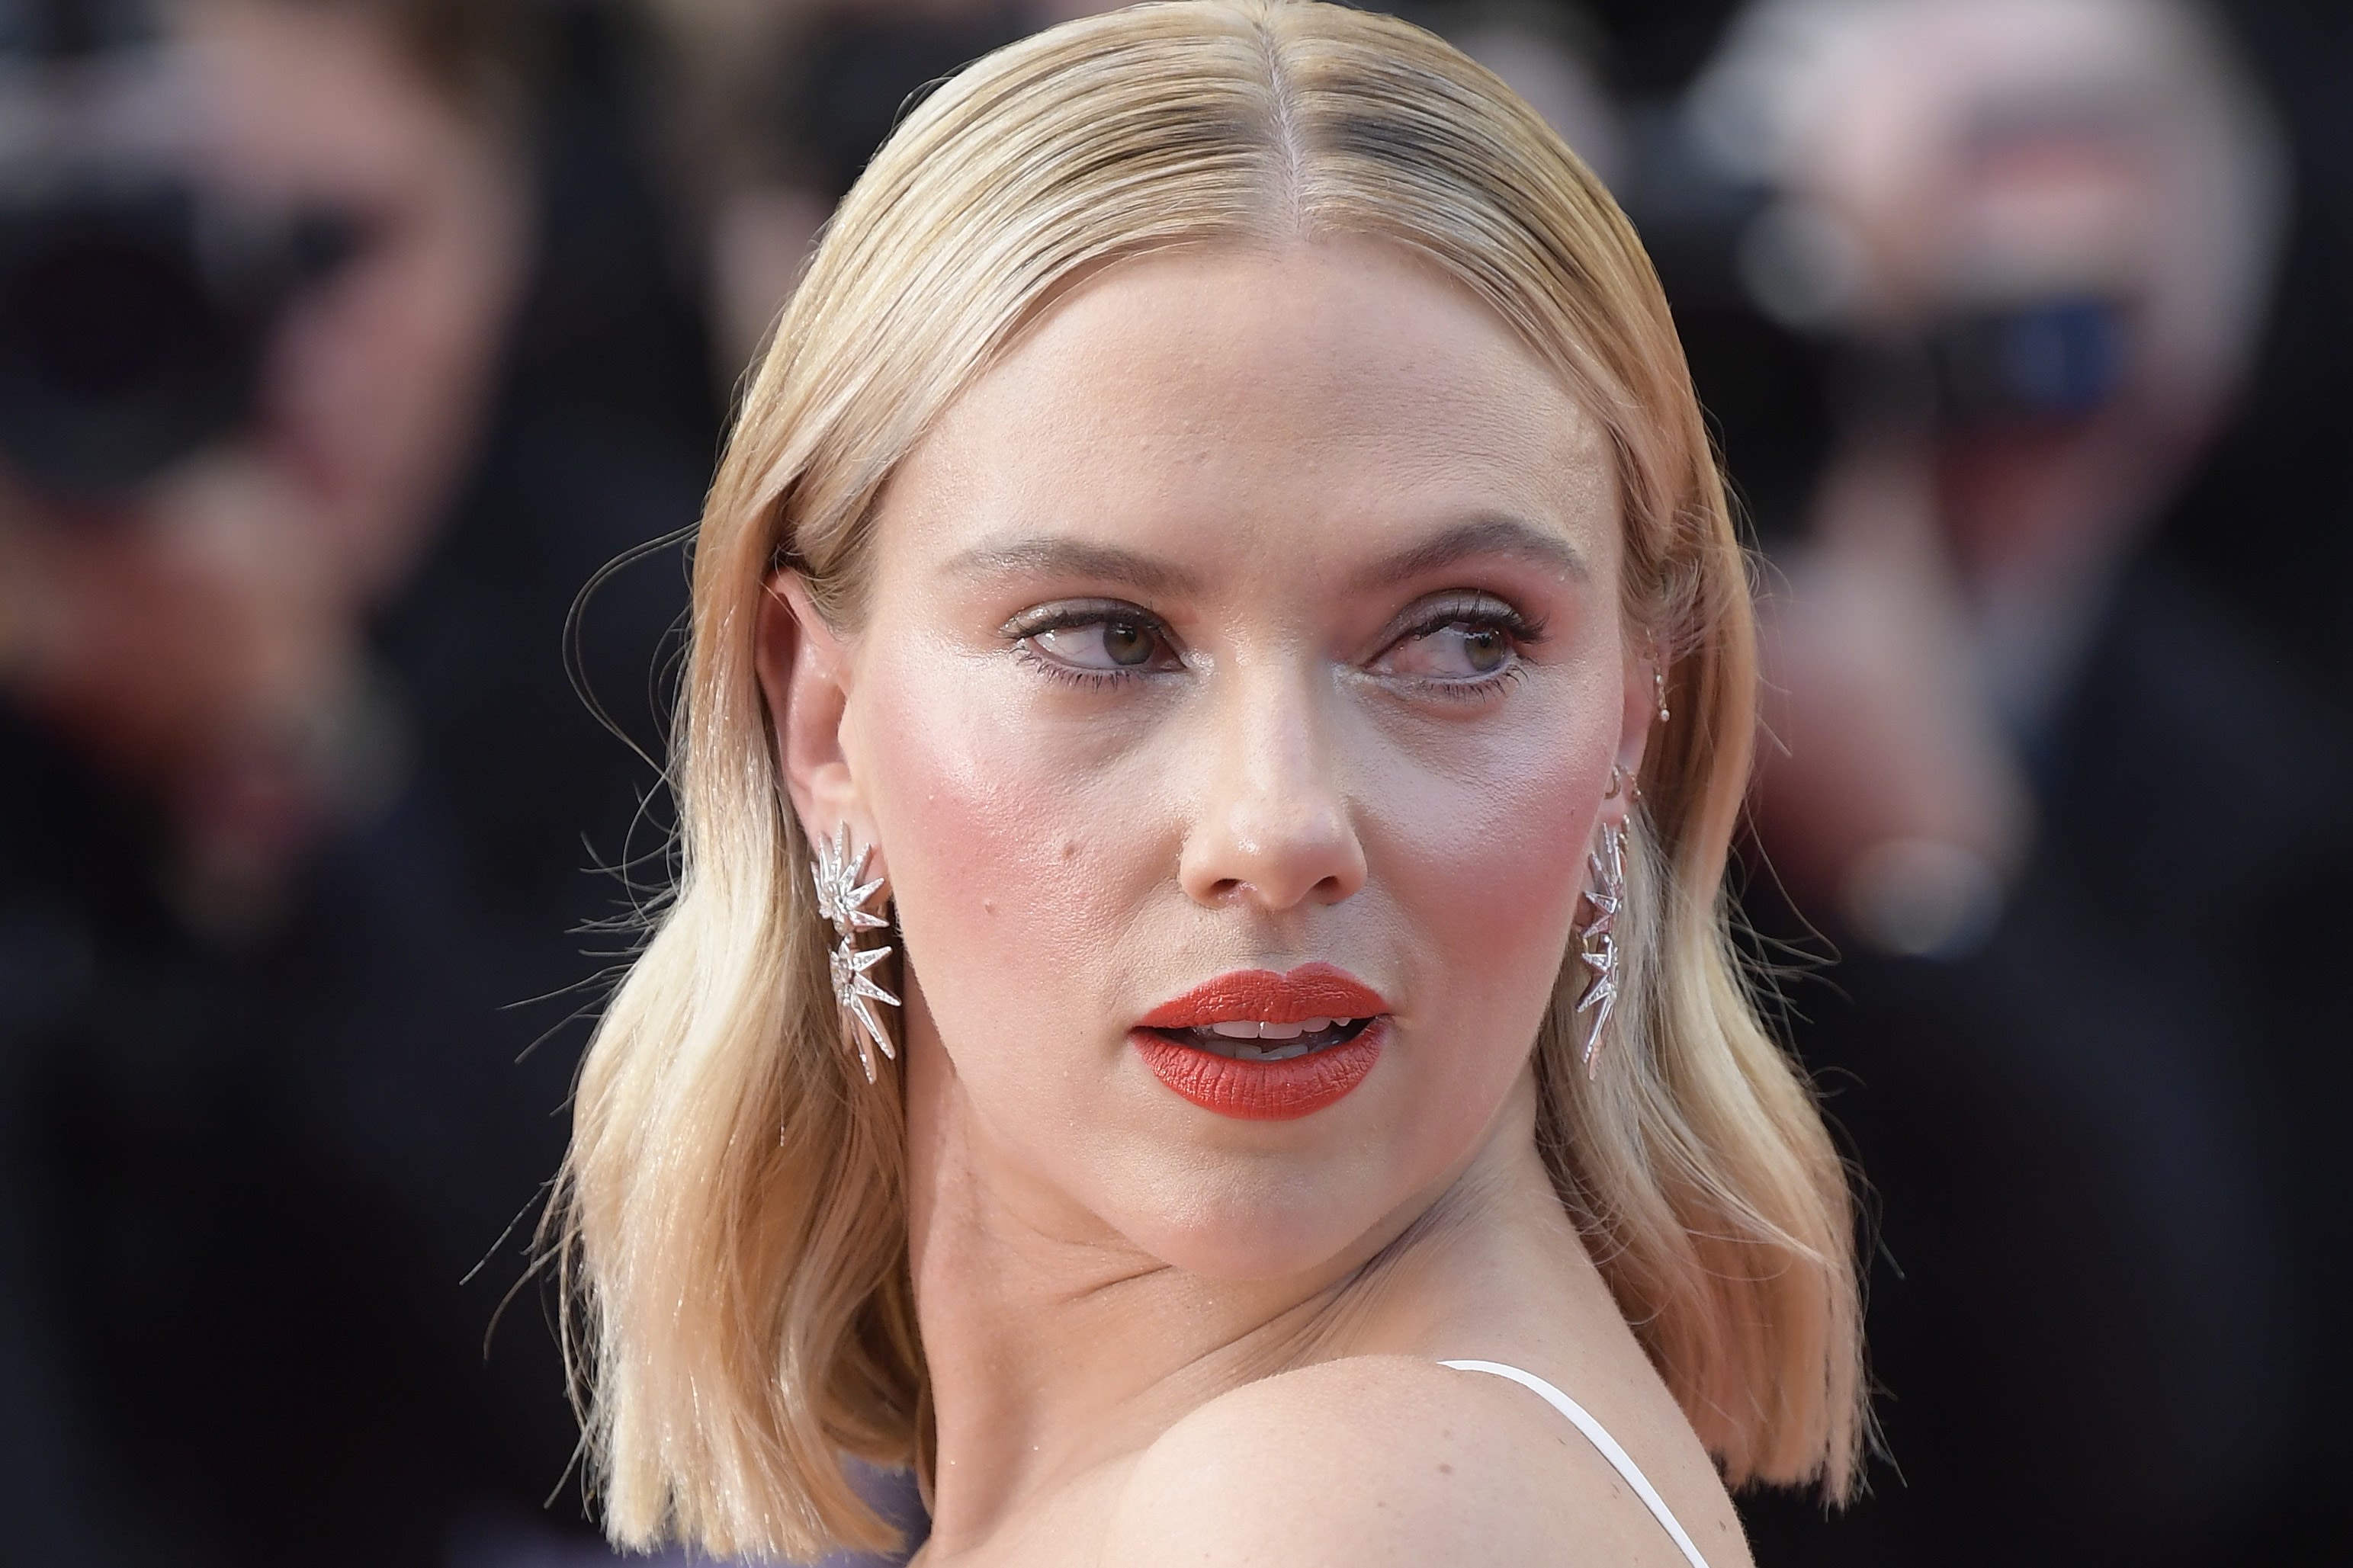 Scarlett Johansson Says She Was ‘Shocked’ and ‘Angered’ Over OpenAI’s Use of a Voice That Was ‘Eerily Similar to Mine’